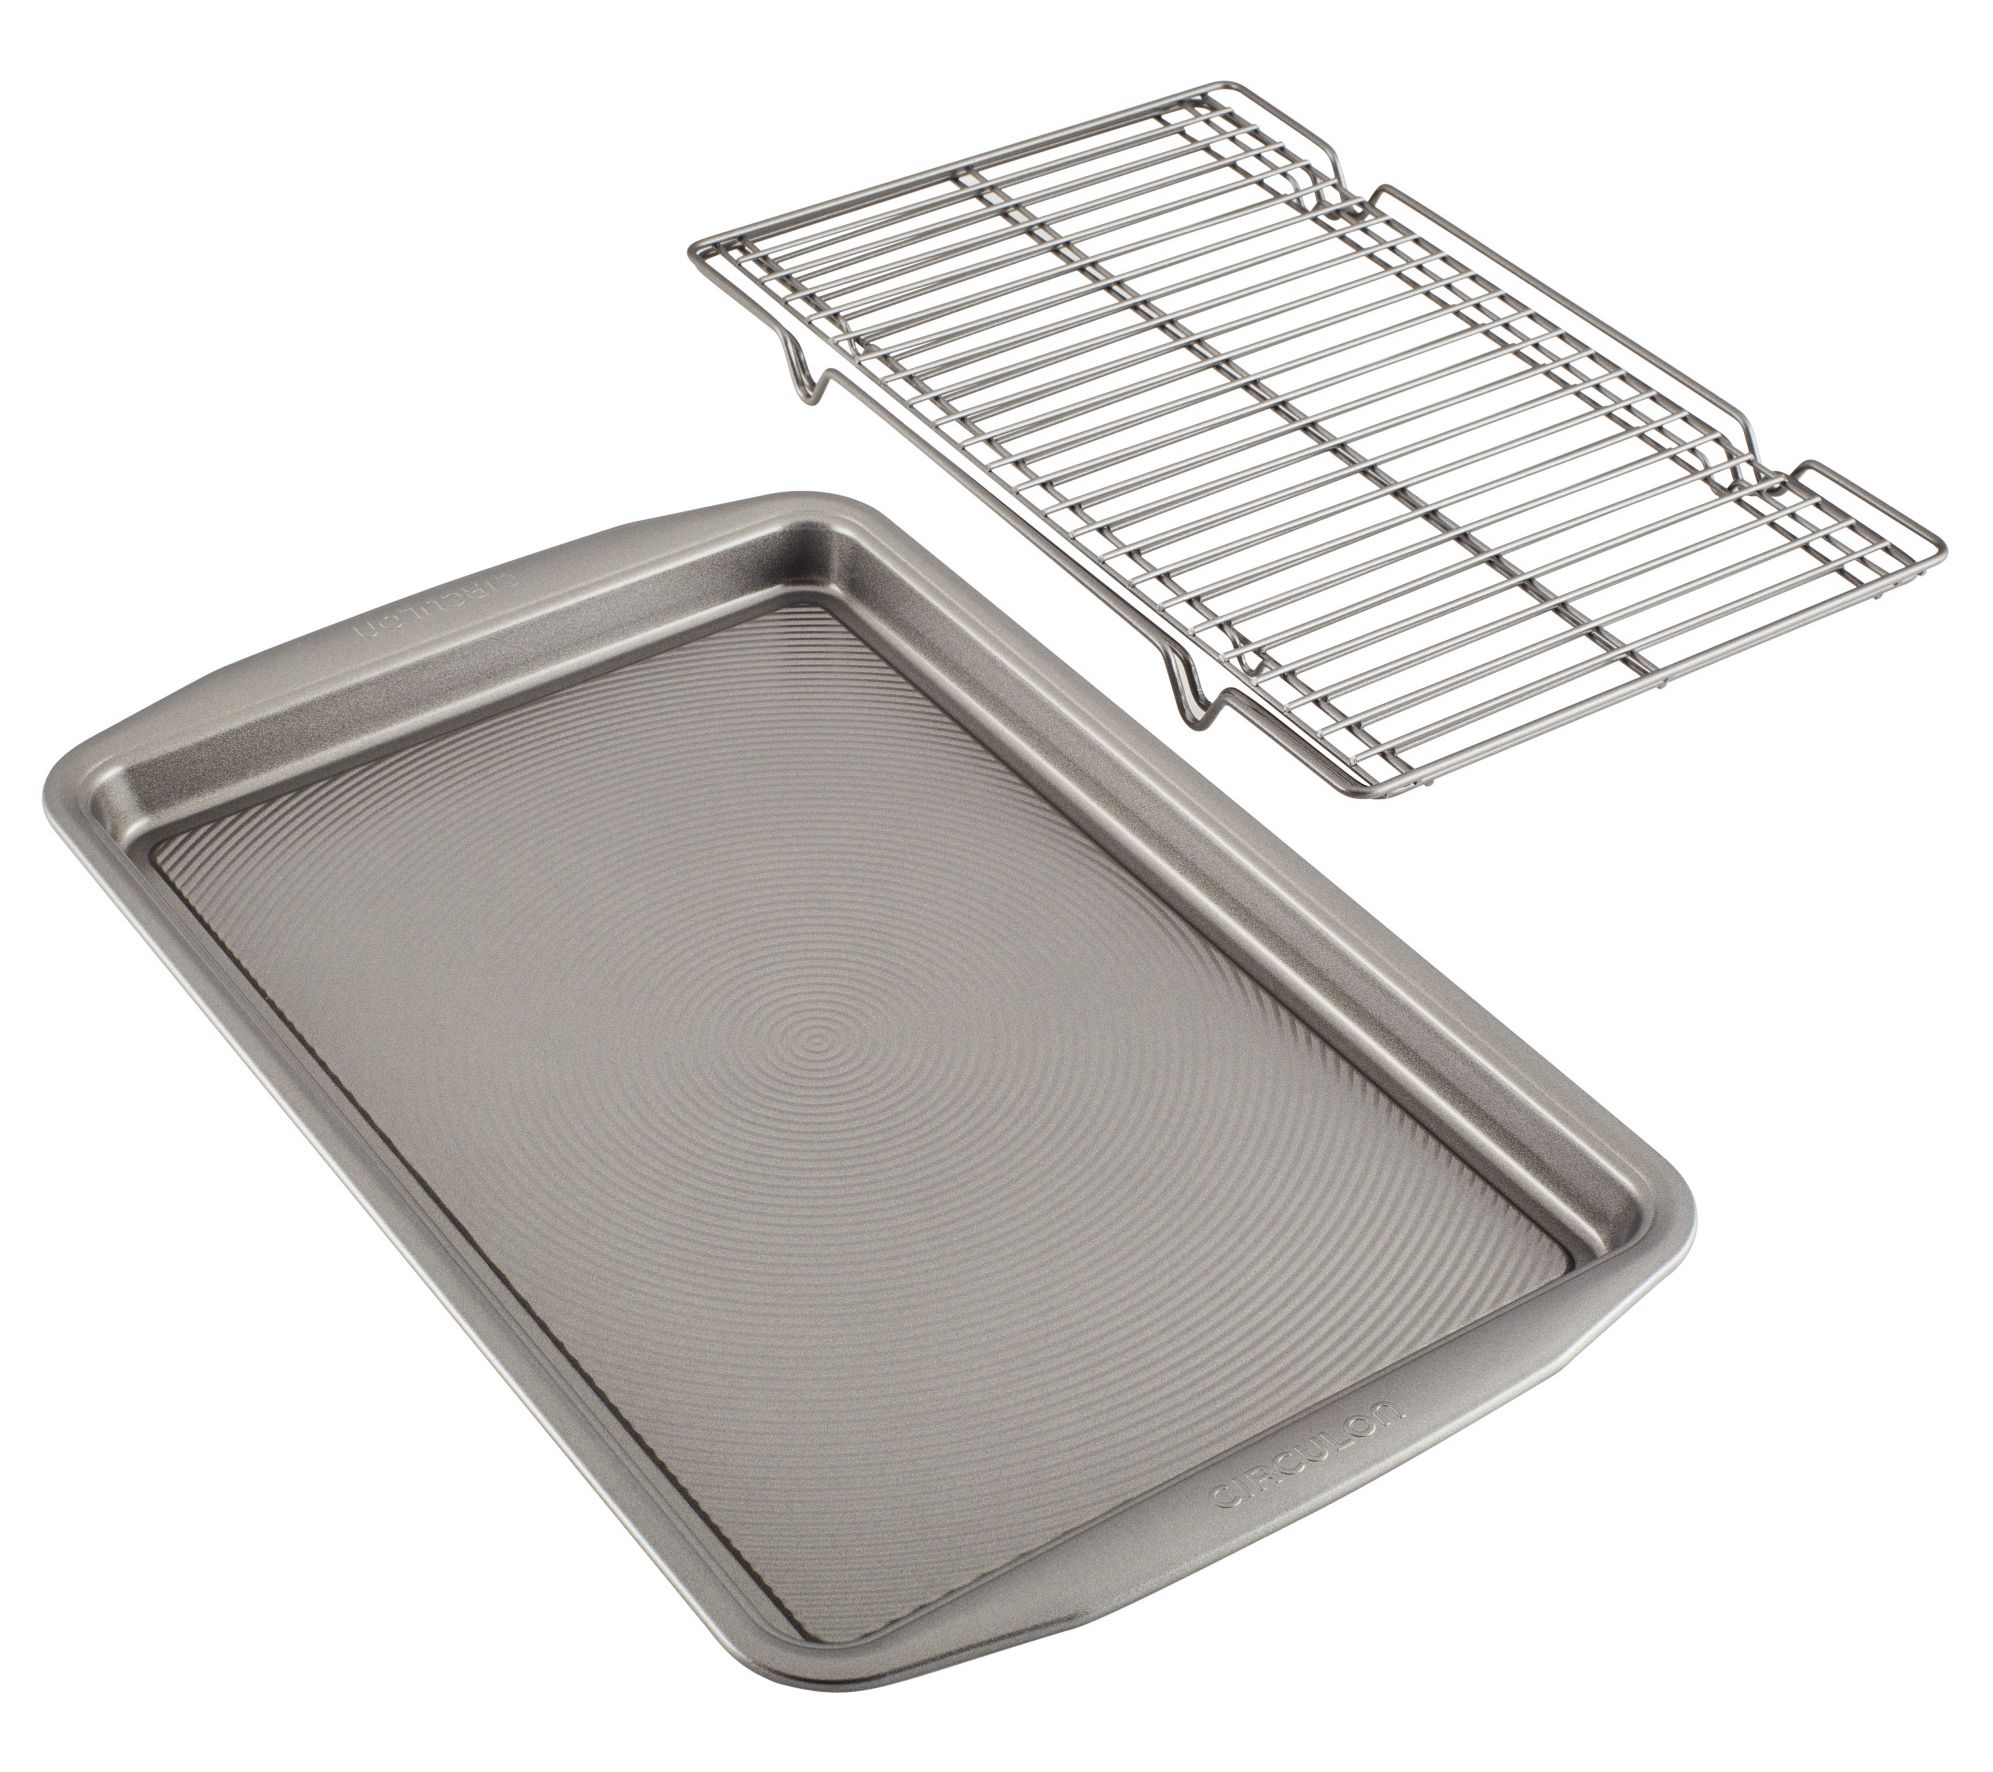 Circulon 11in x 17in Baking Sheet and Cooling R ack 3-Piece Se 